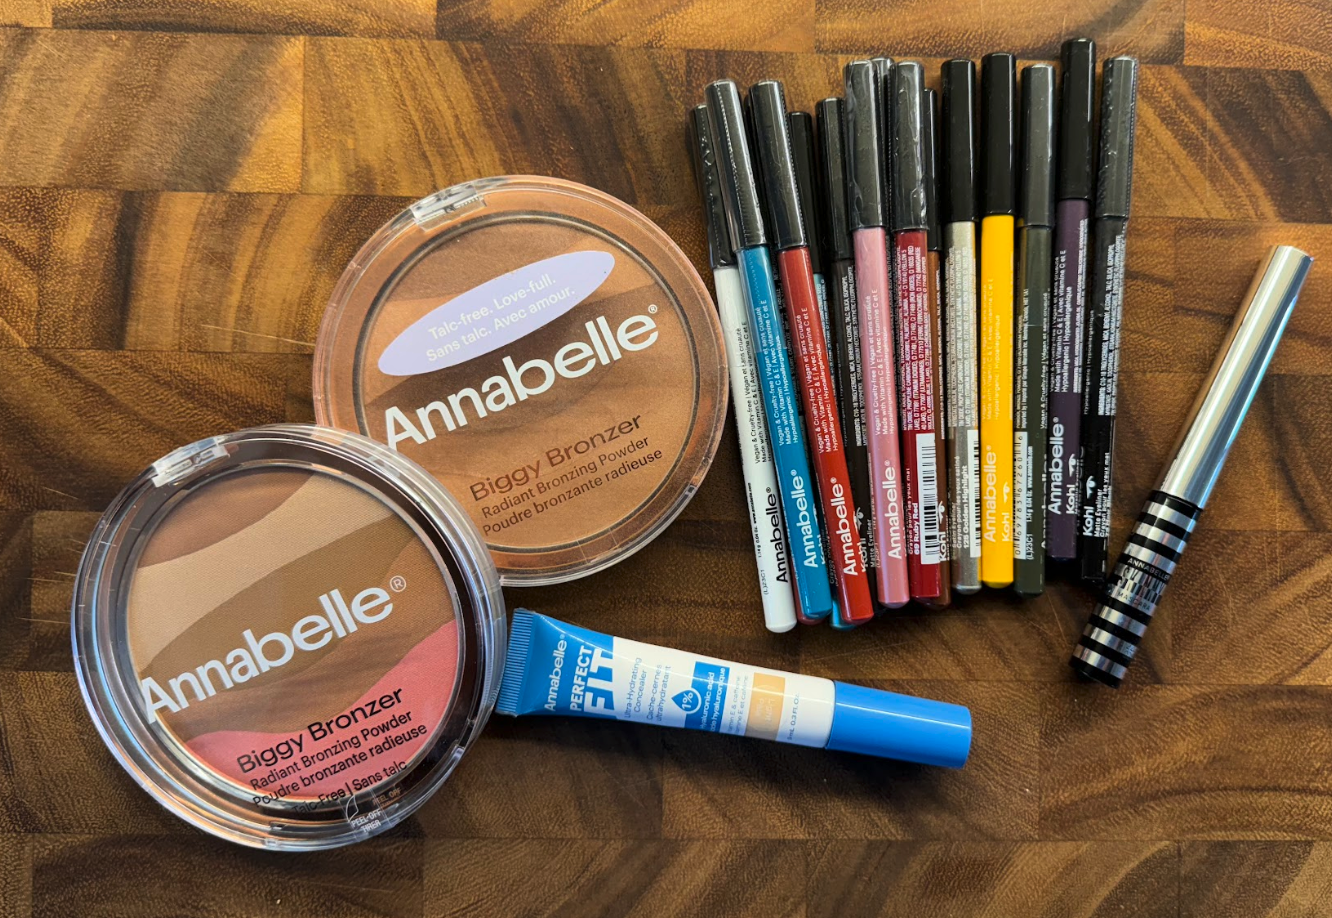 Annabelle cosmetics must have products